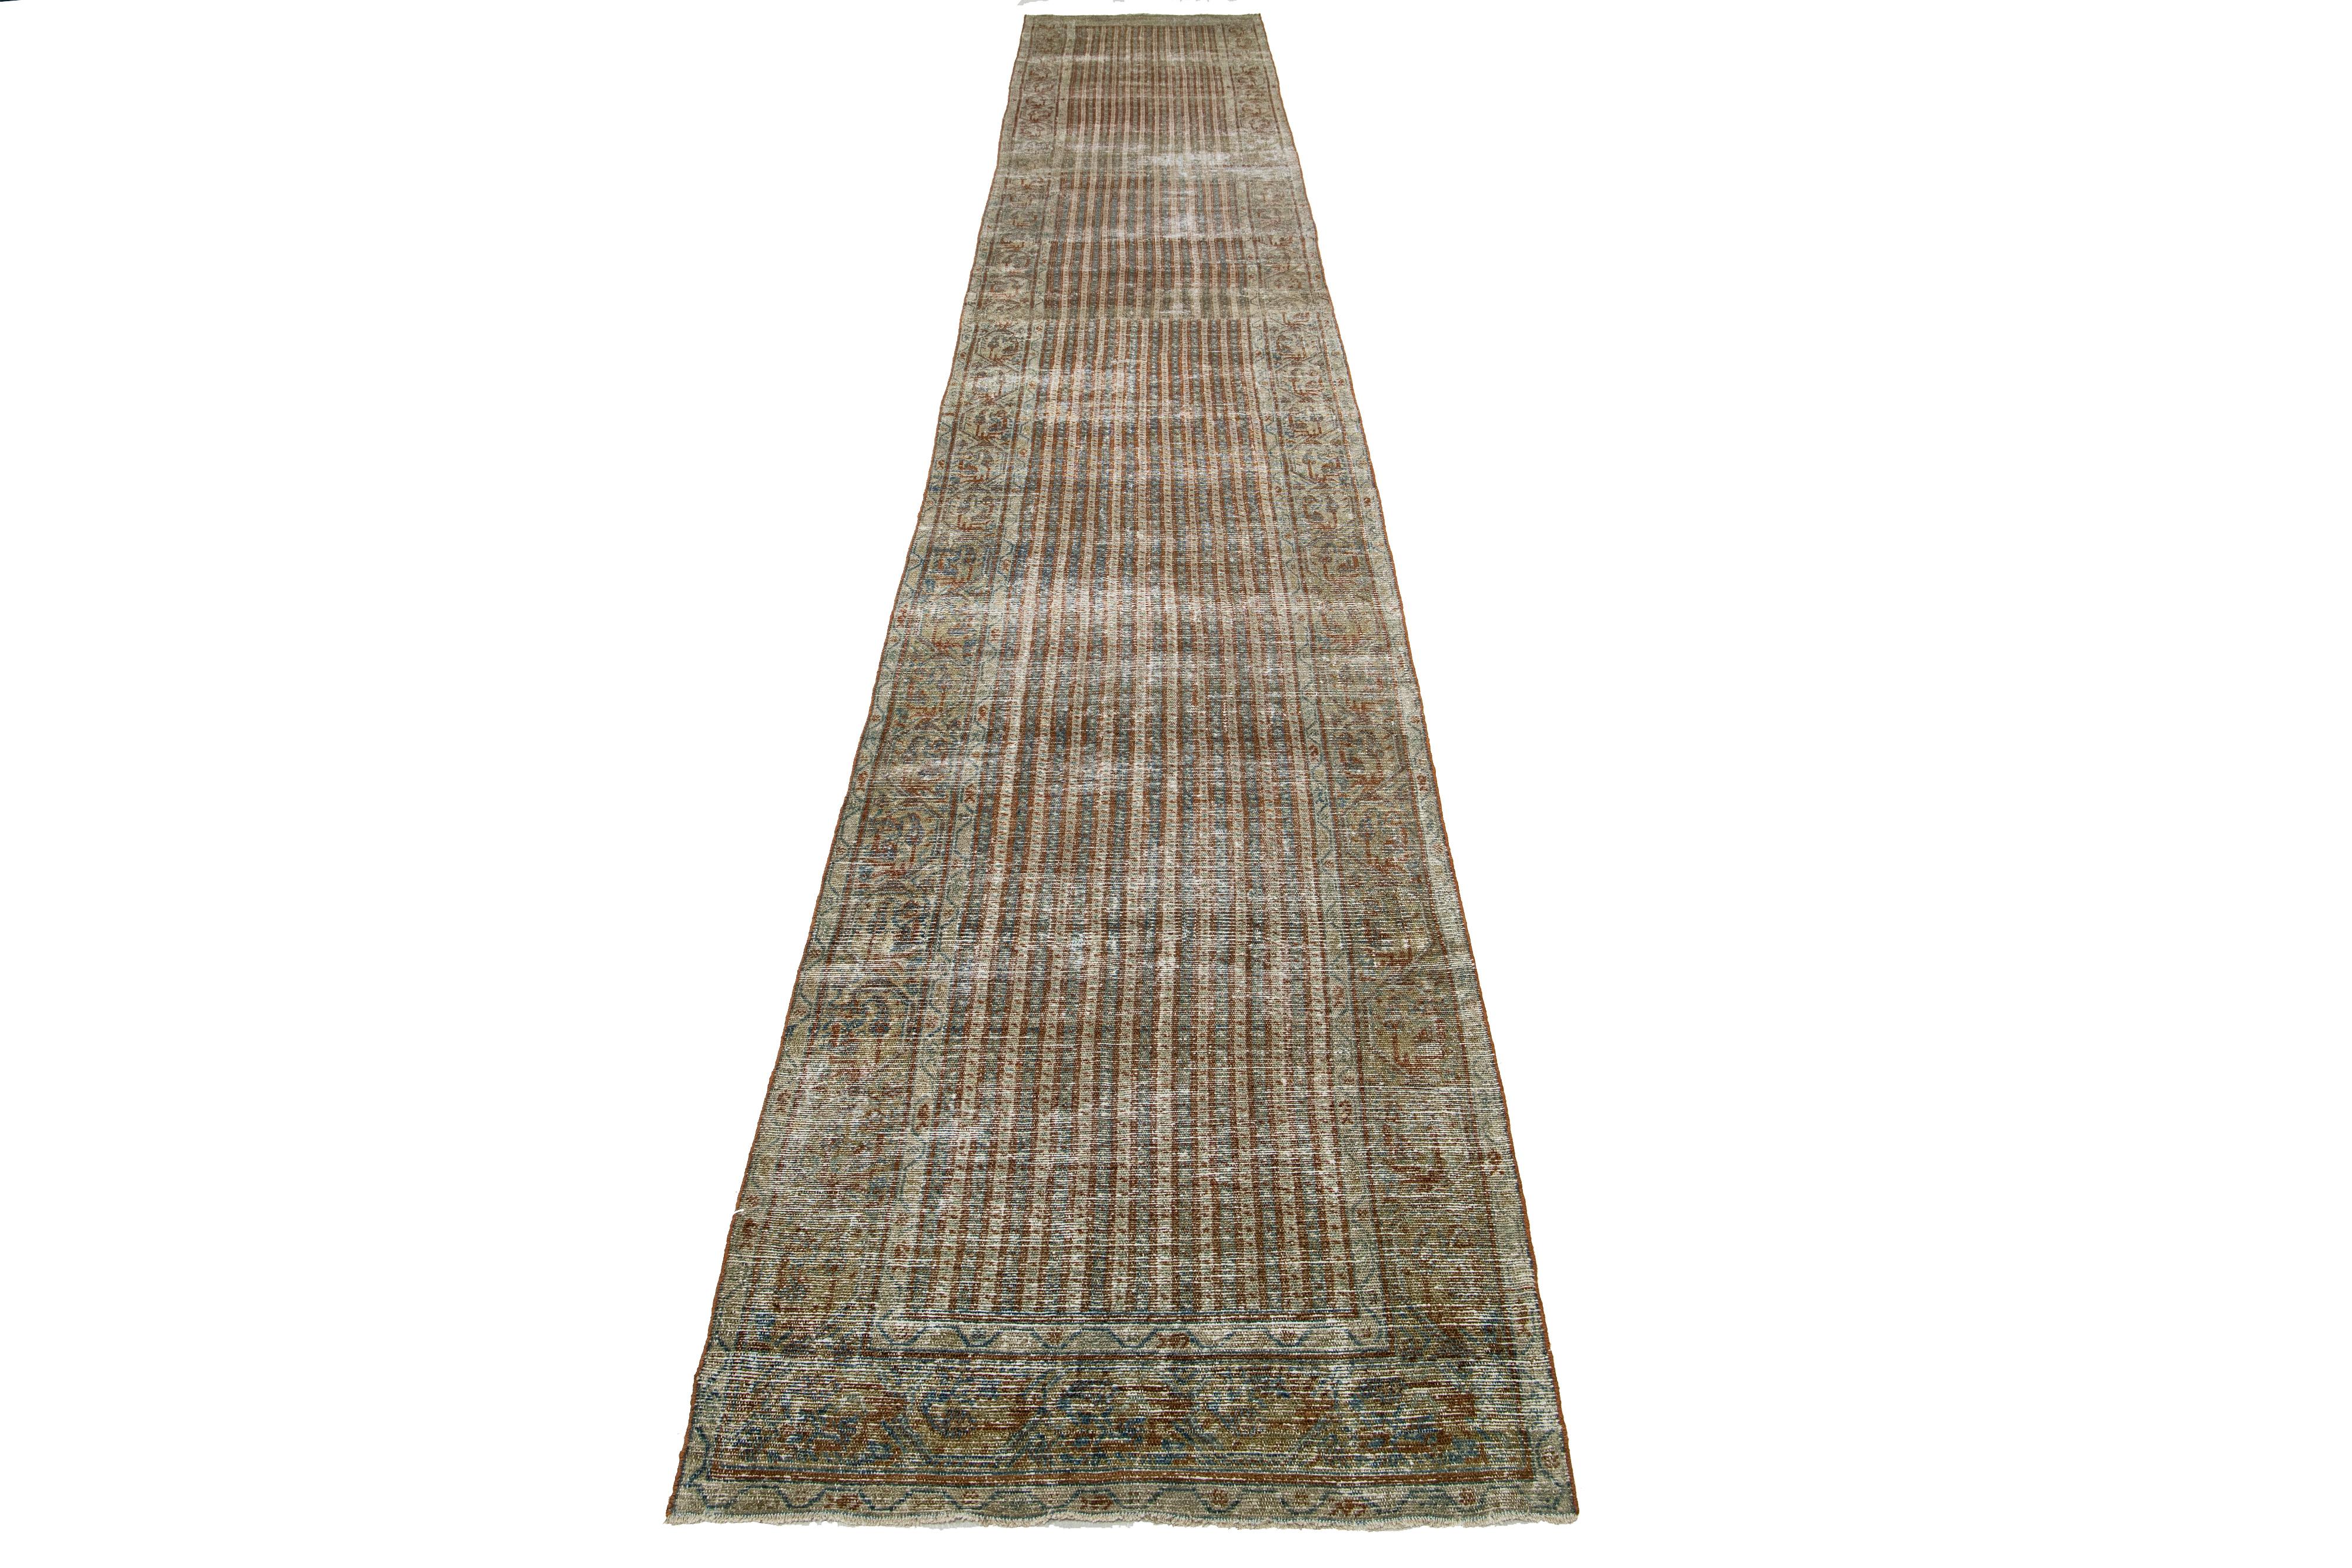 This long Persian Malayer wool rug possesses an antique allure. It showcases hand-knotted wool in a blue field. The striped pattern is embellished with copper and light brown accents.

This rug measures 3'2